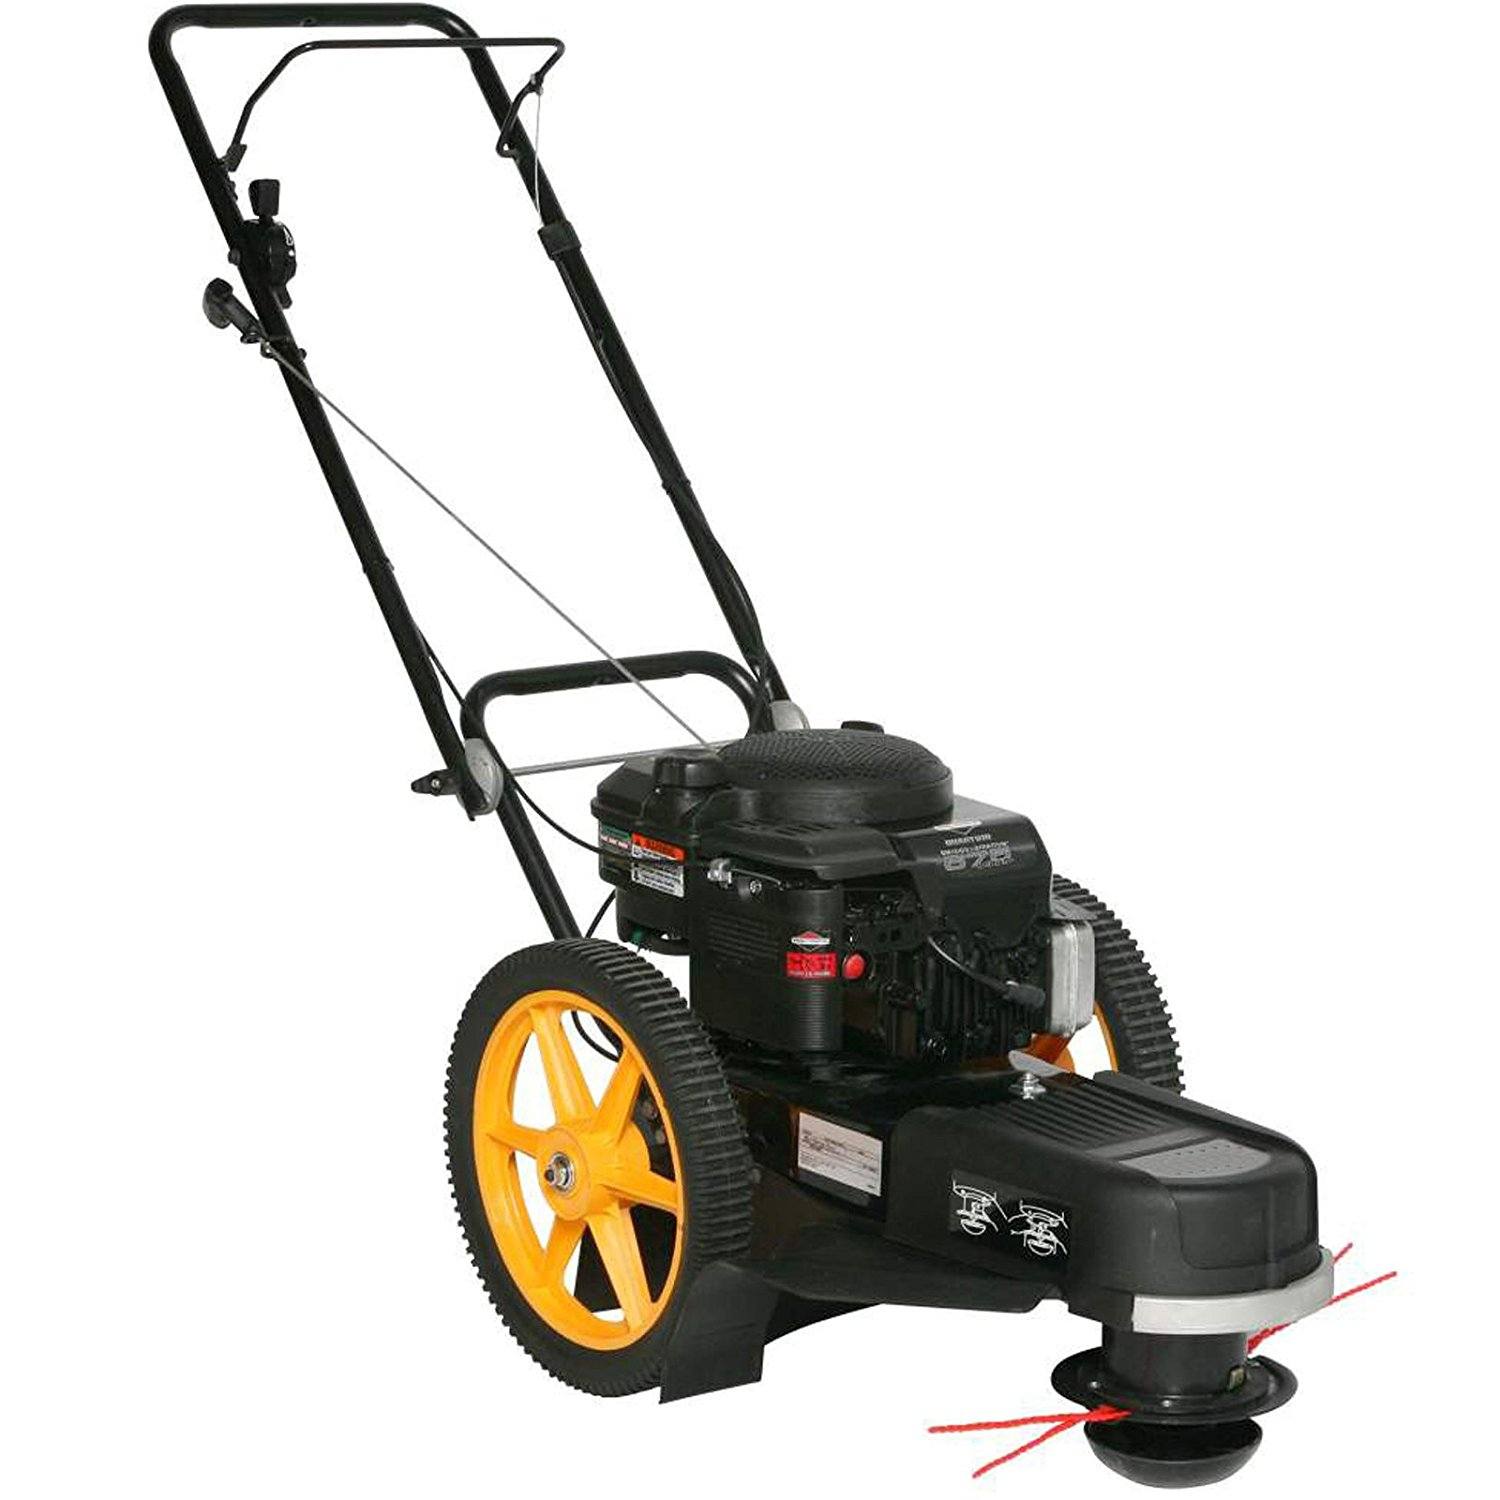 Best Petrol Grass Strimmers With Wheels Uk Reviews